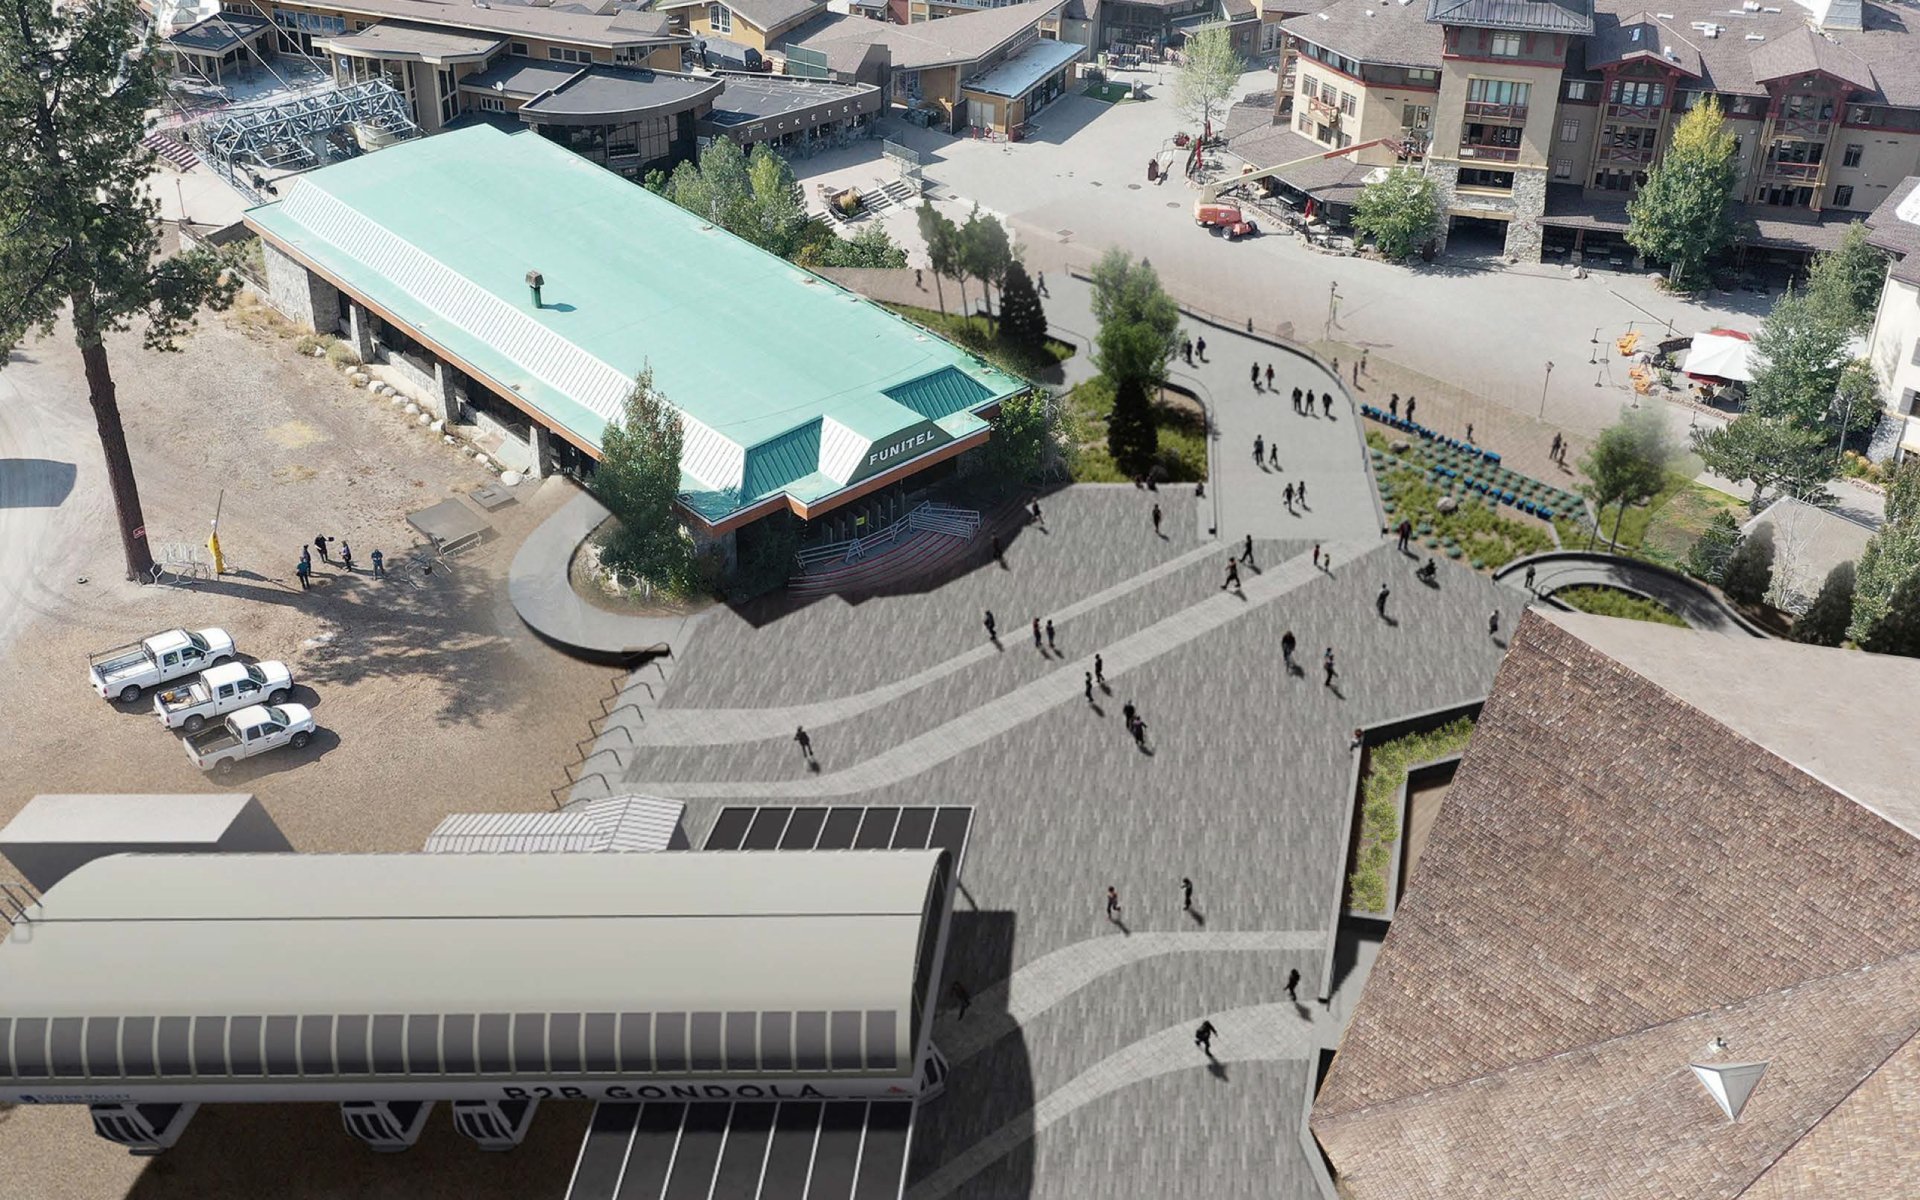 A rendering of the new Funitel Plaza in The Village at Palisades Tahoe.